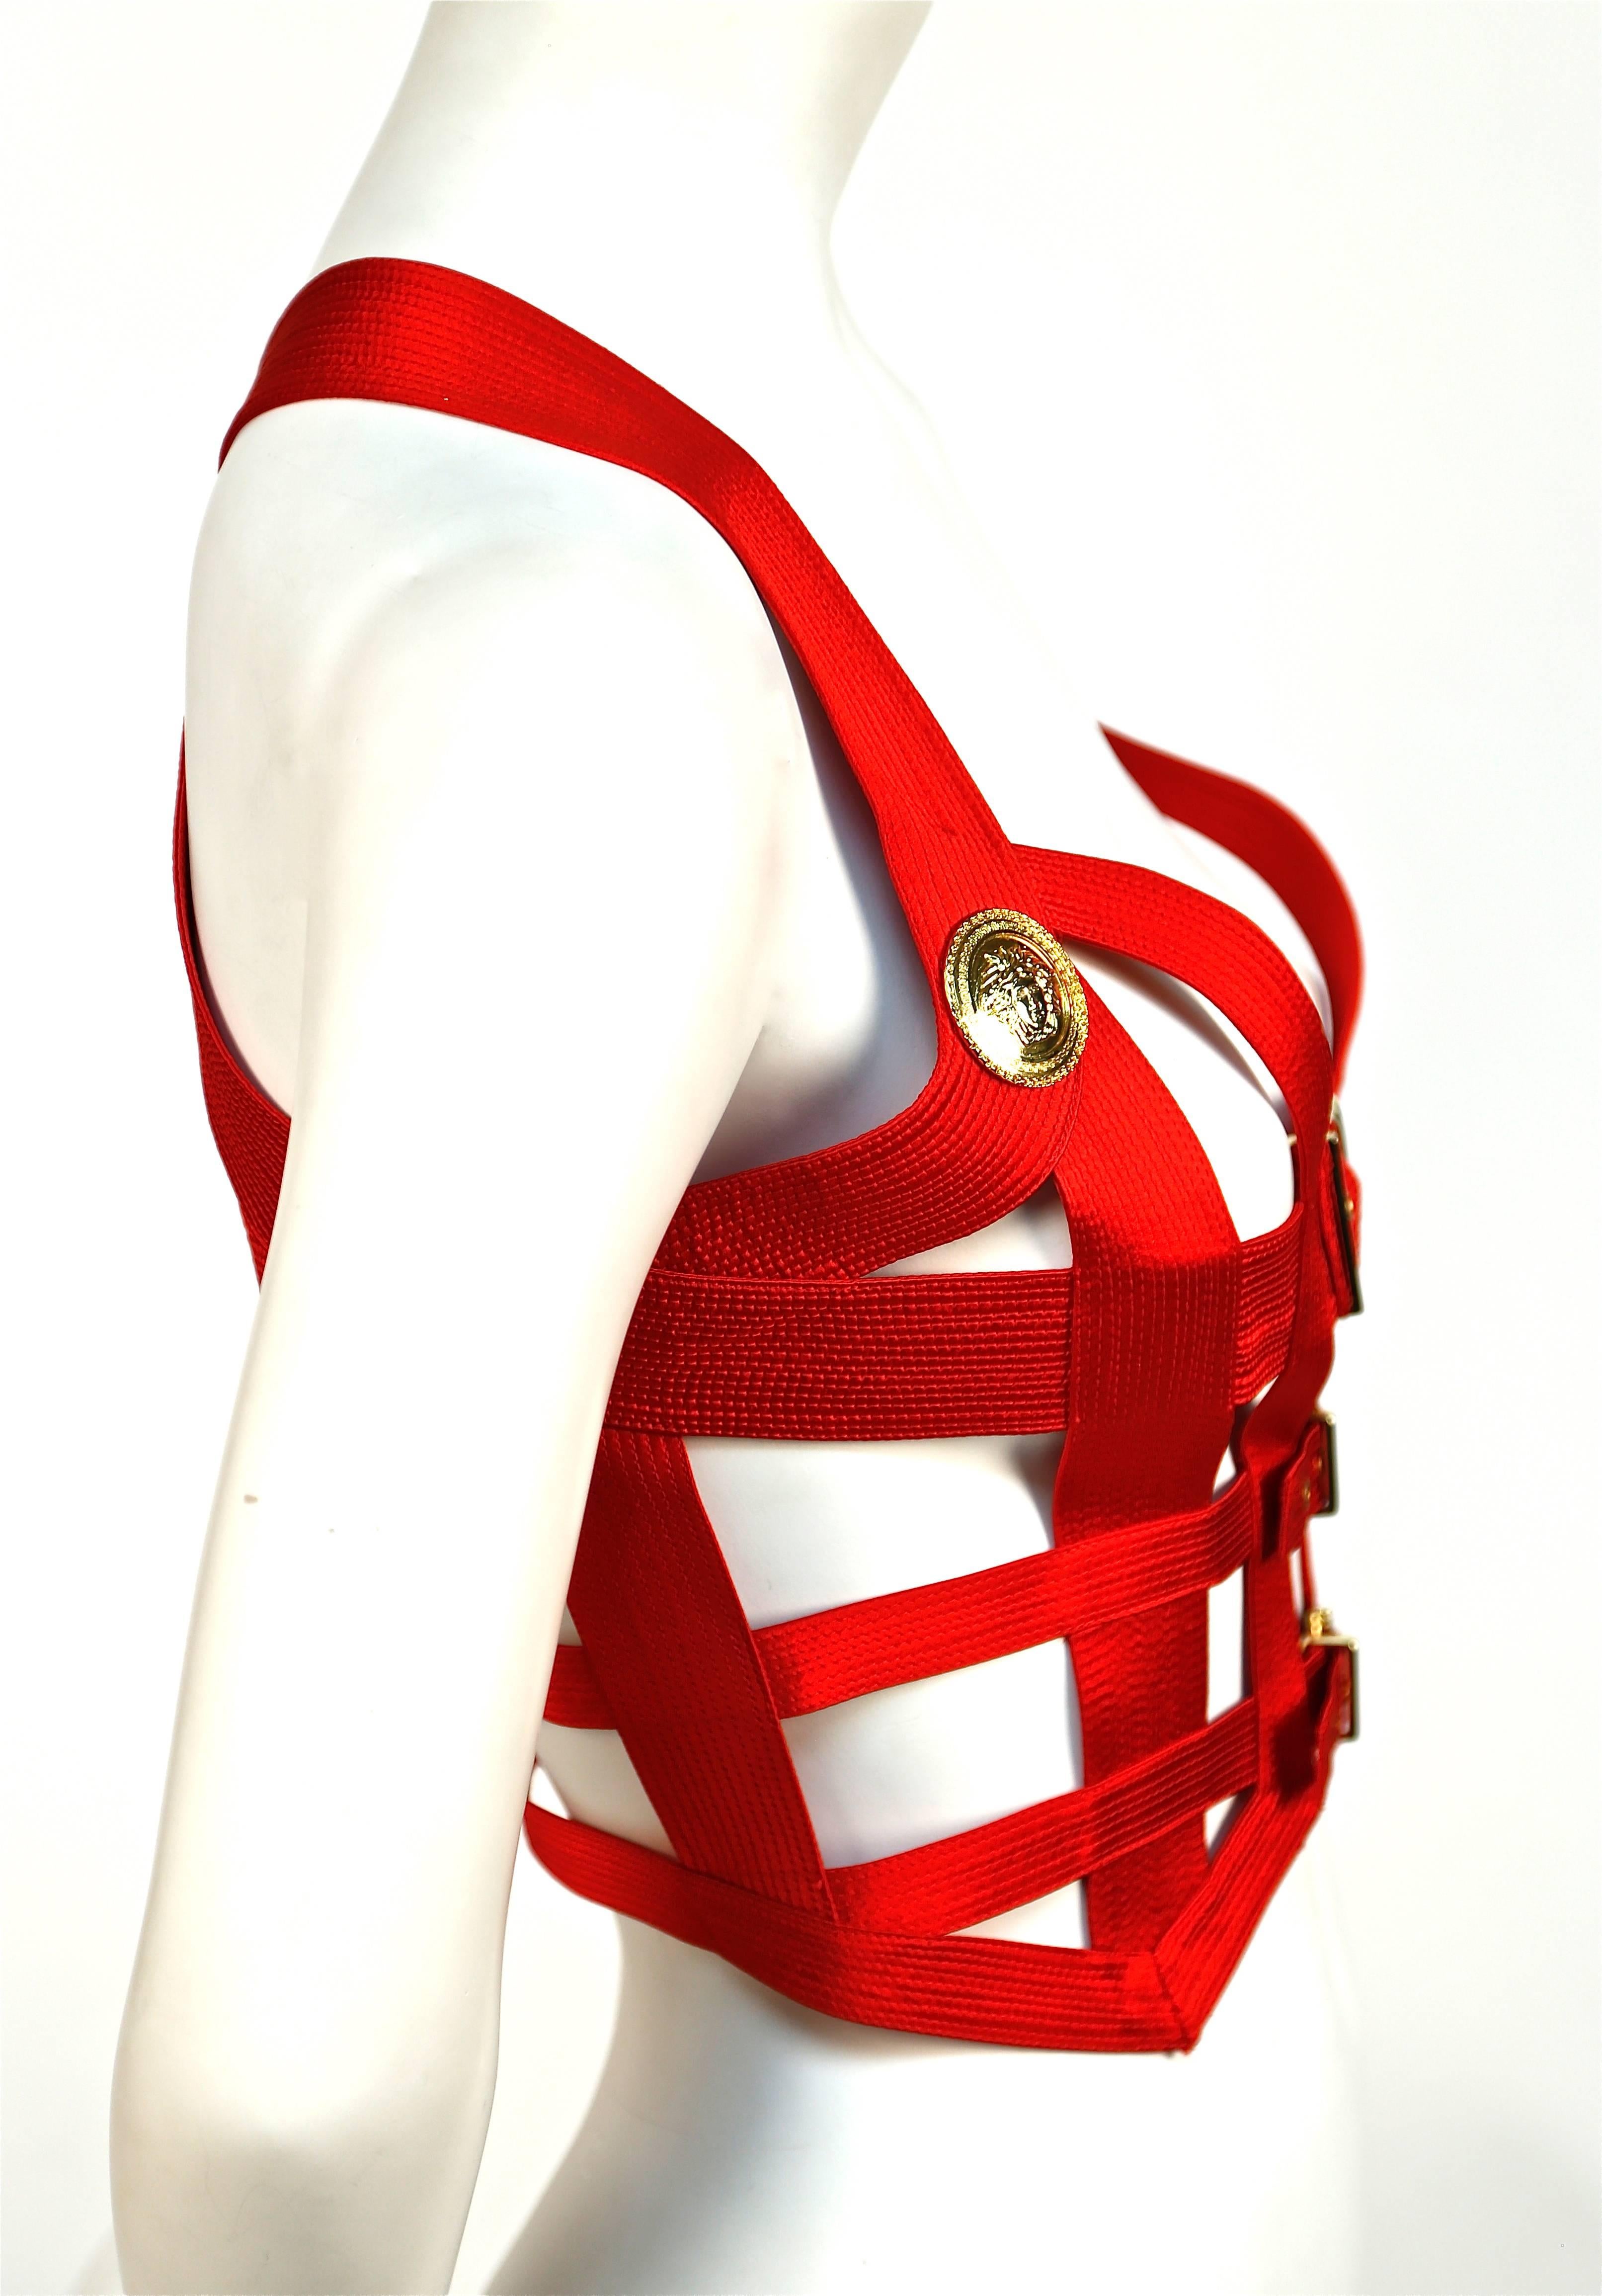 Iconic and very rare Gianni Versace Couture red silk topstitched bondage harness bodice with gold-toned Medusa embossed hardware designed by Gianni Versace exactly as seen in the Fall 1992 Bondage runway collection.  Labeled an Italian size 42 which